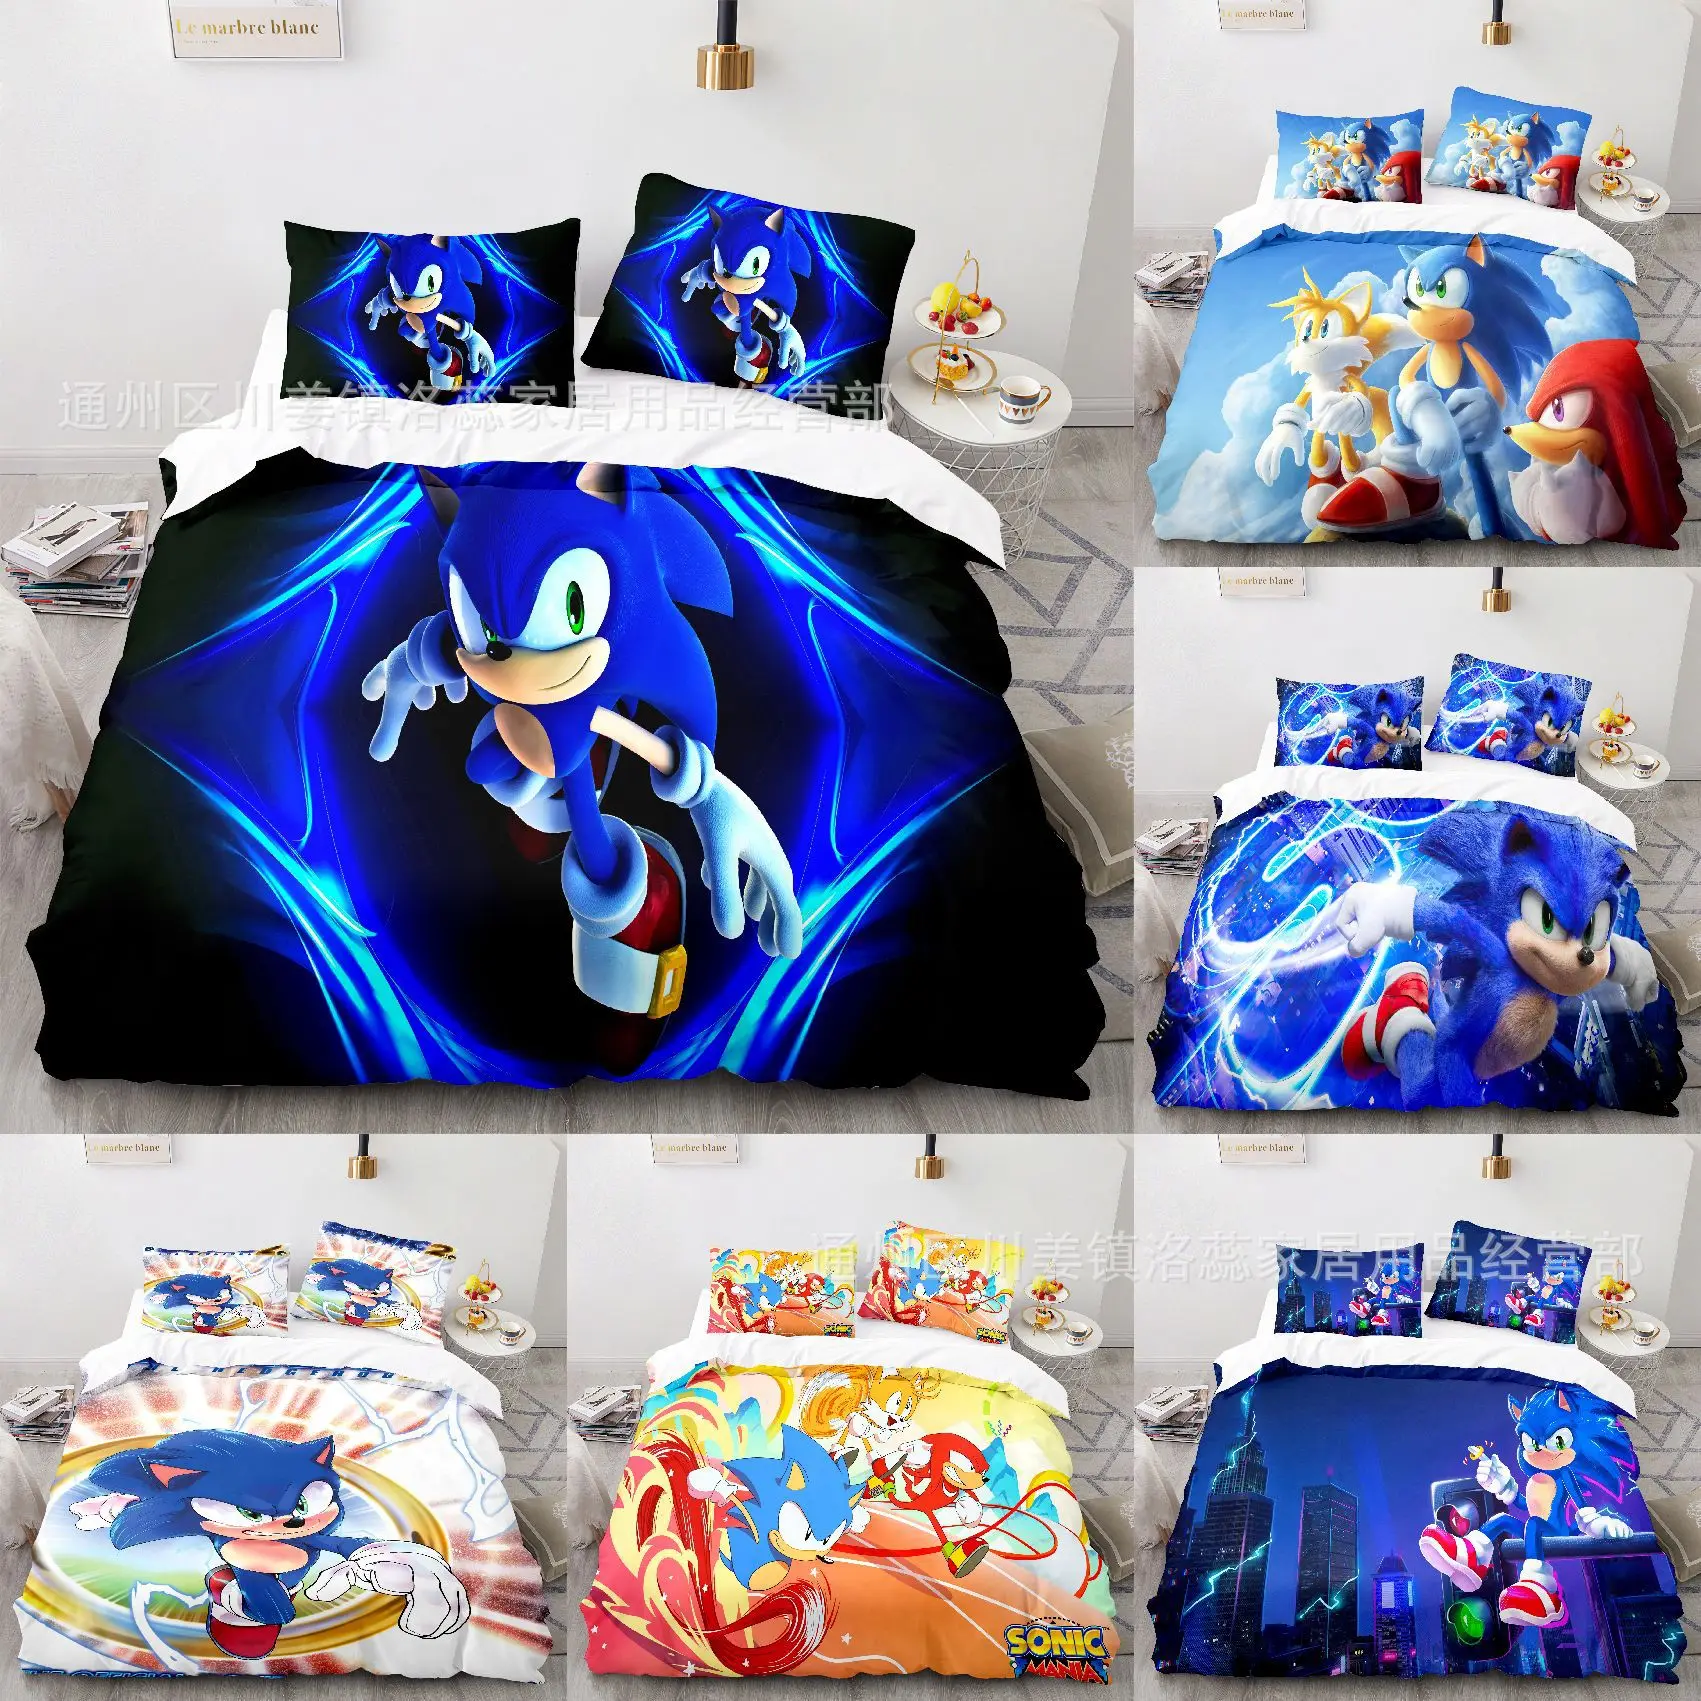 

New Cartoon Quilt Cover Sonic The Hedgehog Game Surrounding Fashion Animation Printing High-value Creative Home Three-piece Set